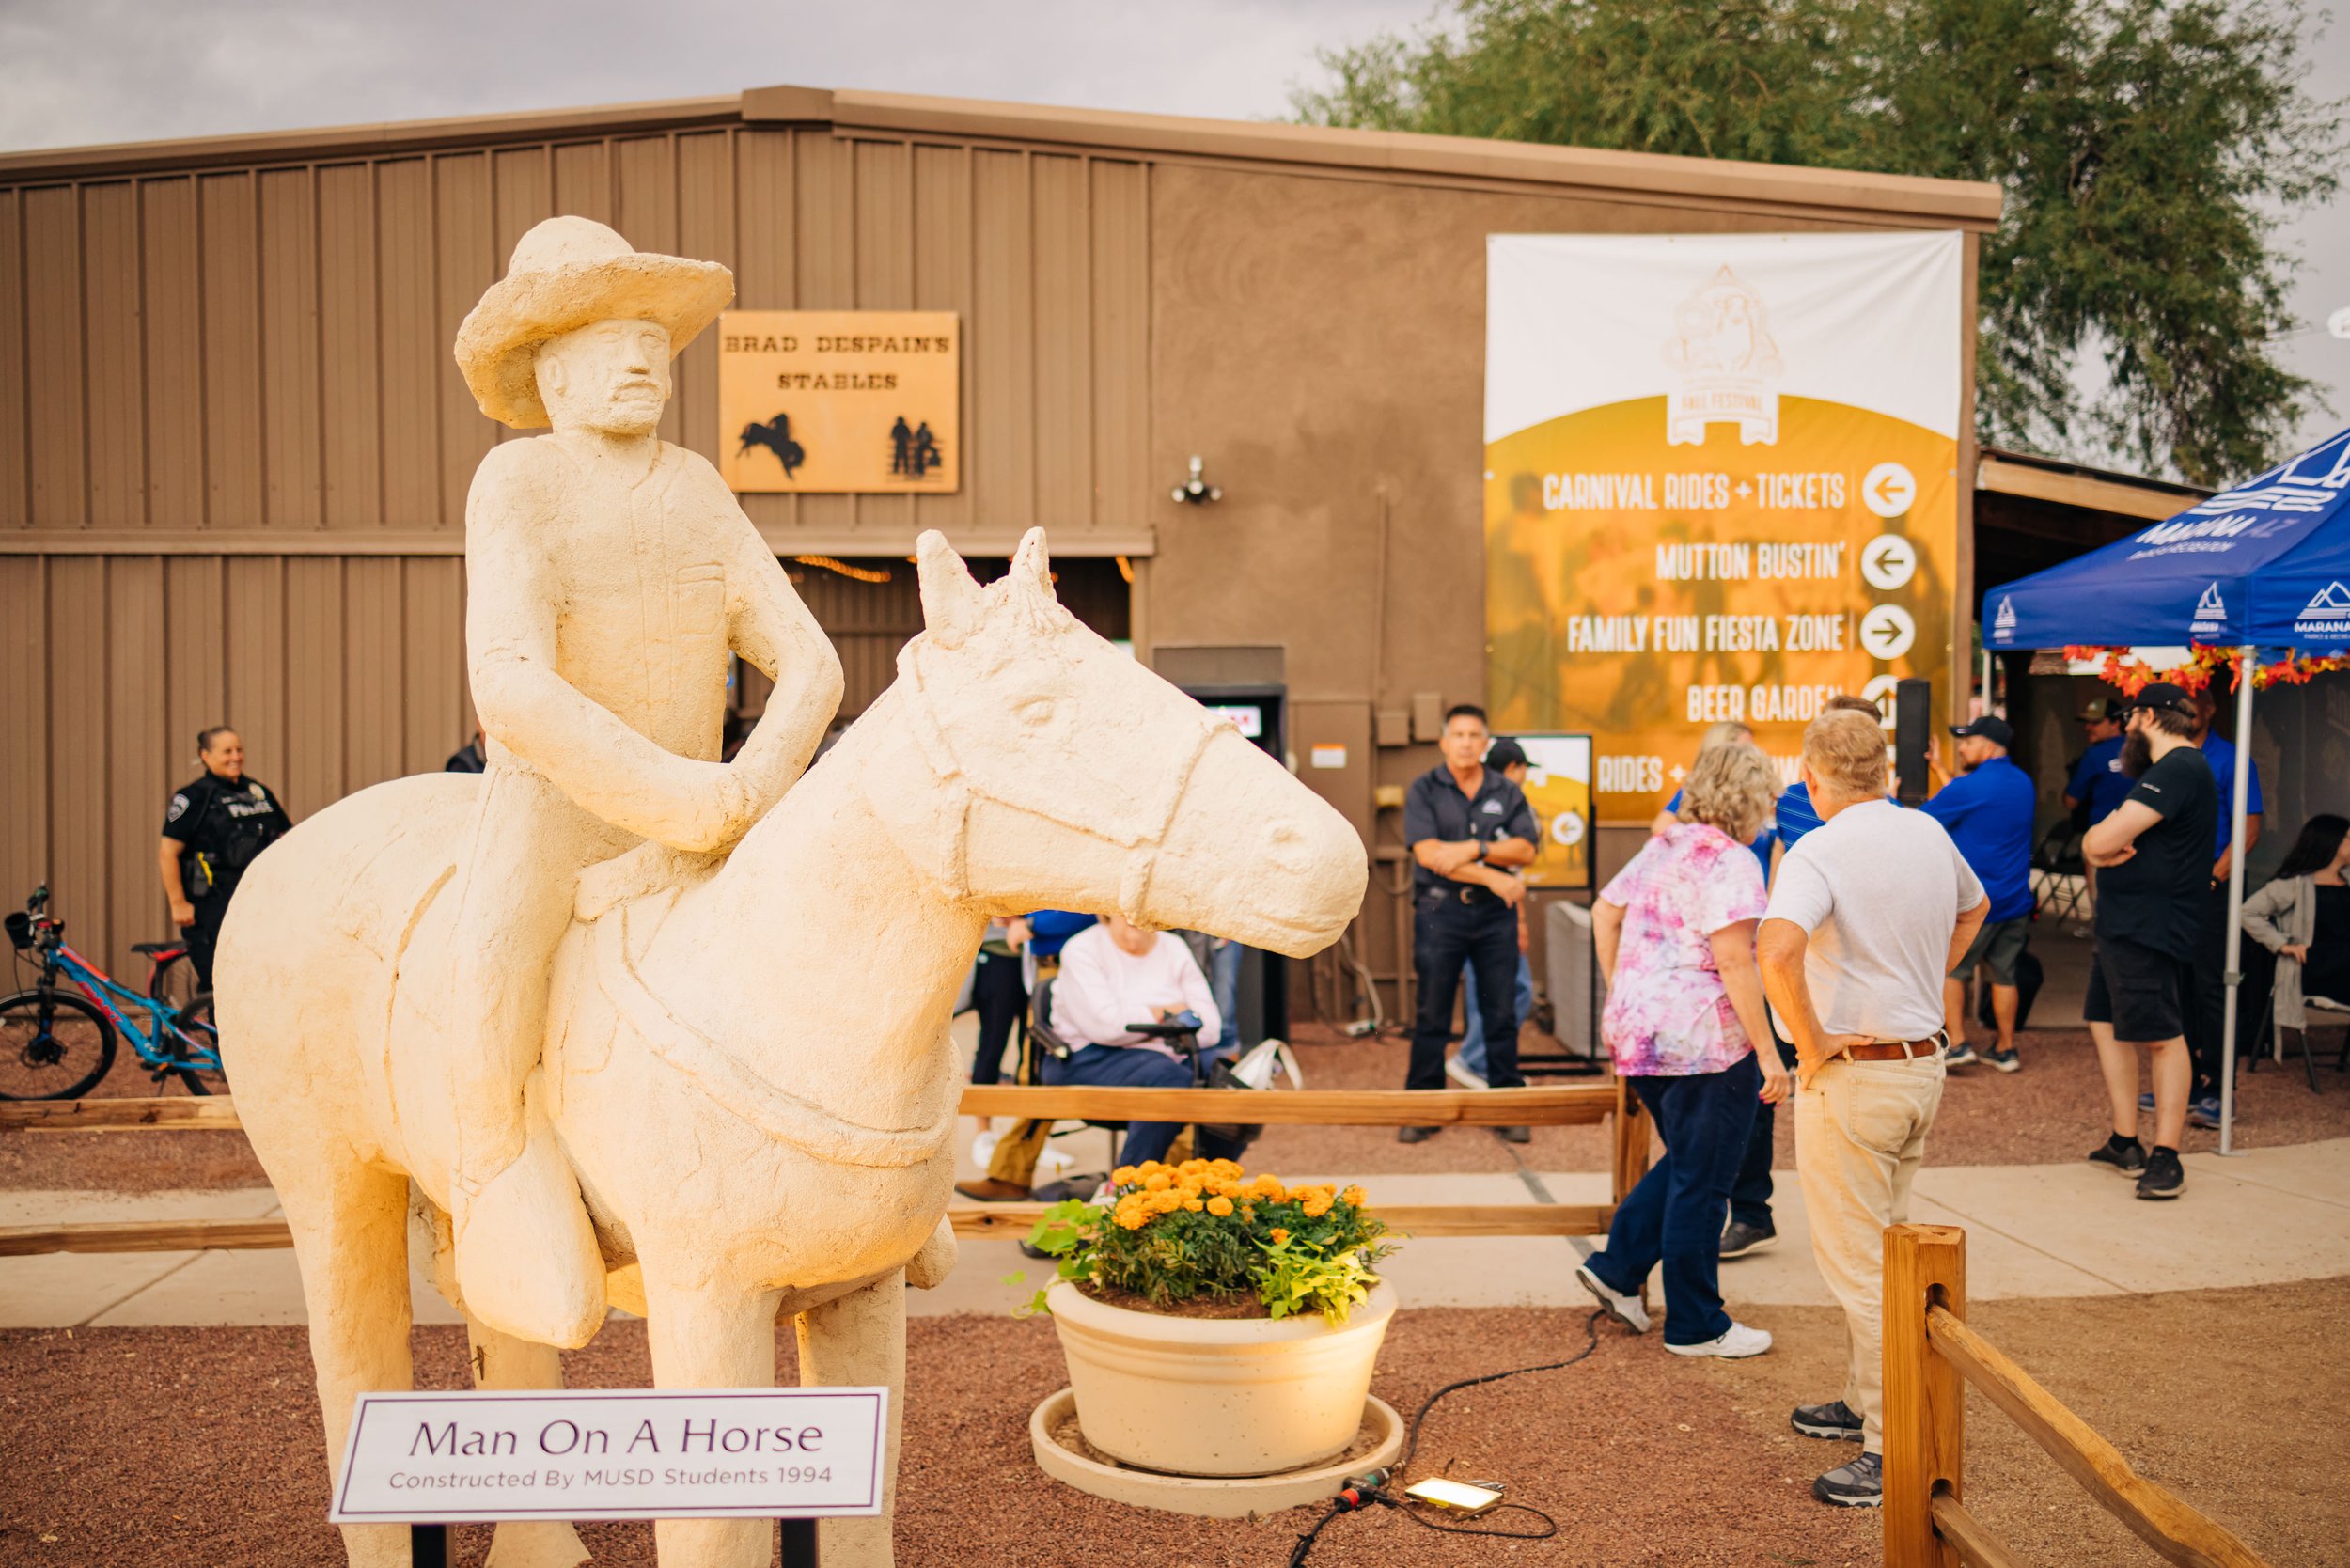  Man on the Horse unveiling at the Marana Fall Festival 